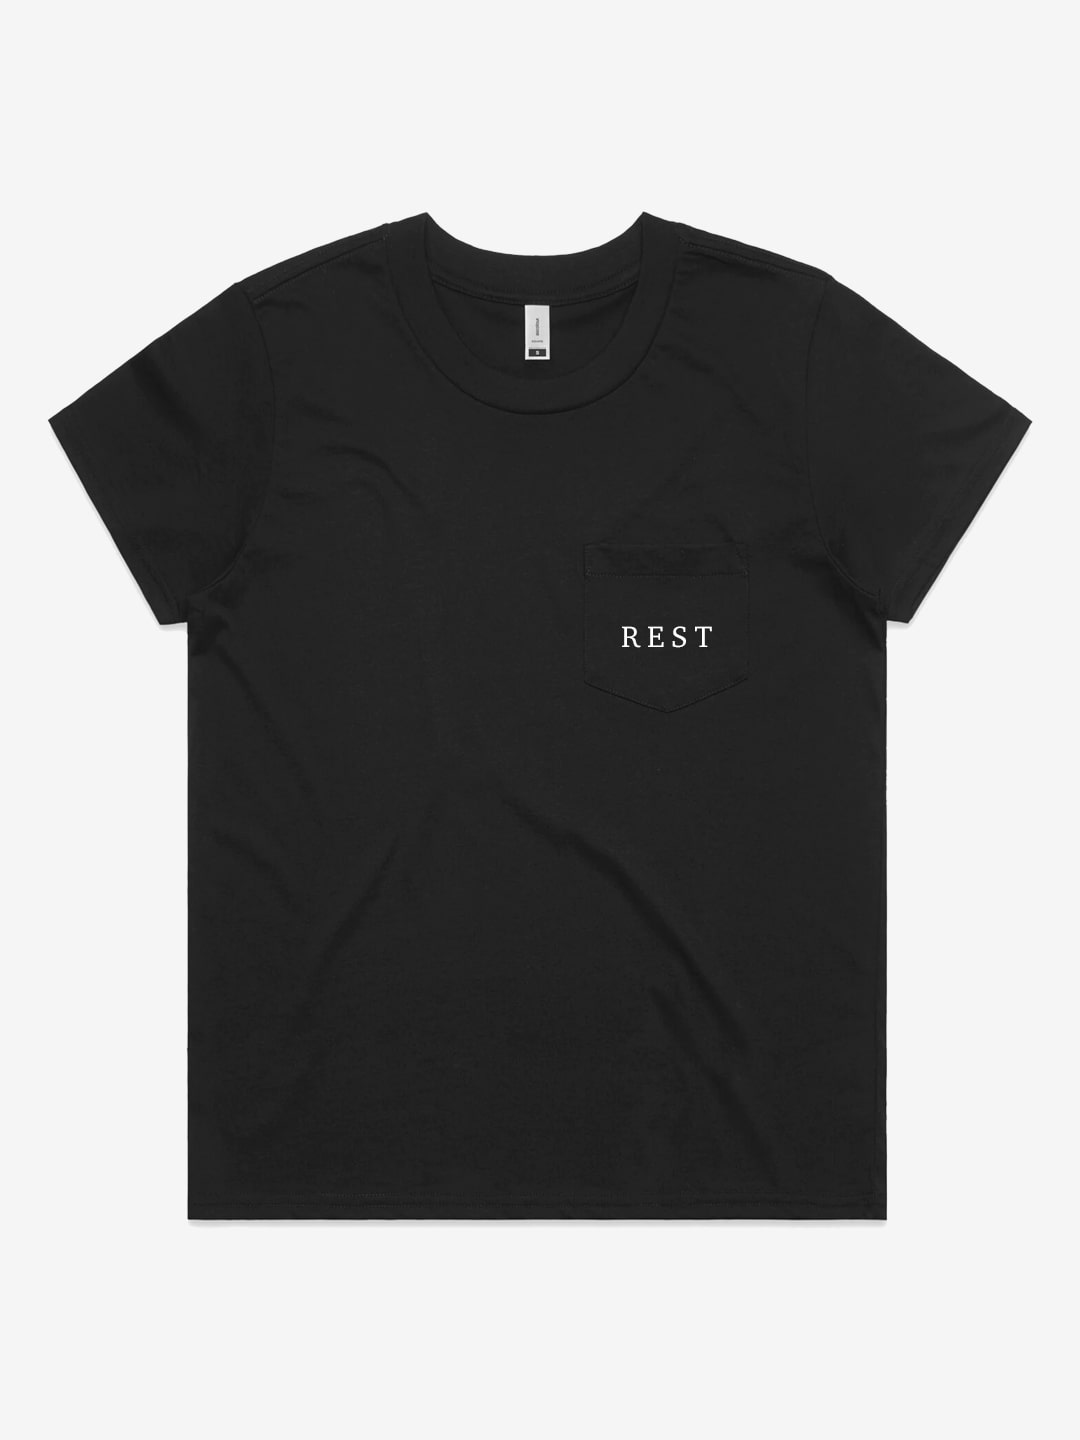 Rejoice & Do Good Christian Apparel - Women's Black Pocket T-shirt Tee with the words Rest on the pocket based on Genesis and the 7th day of rest